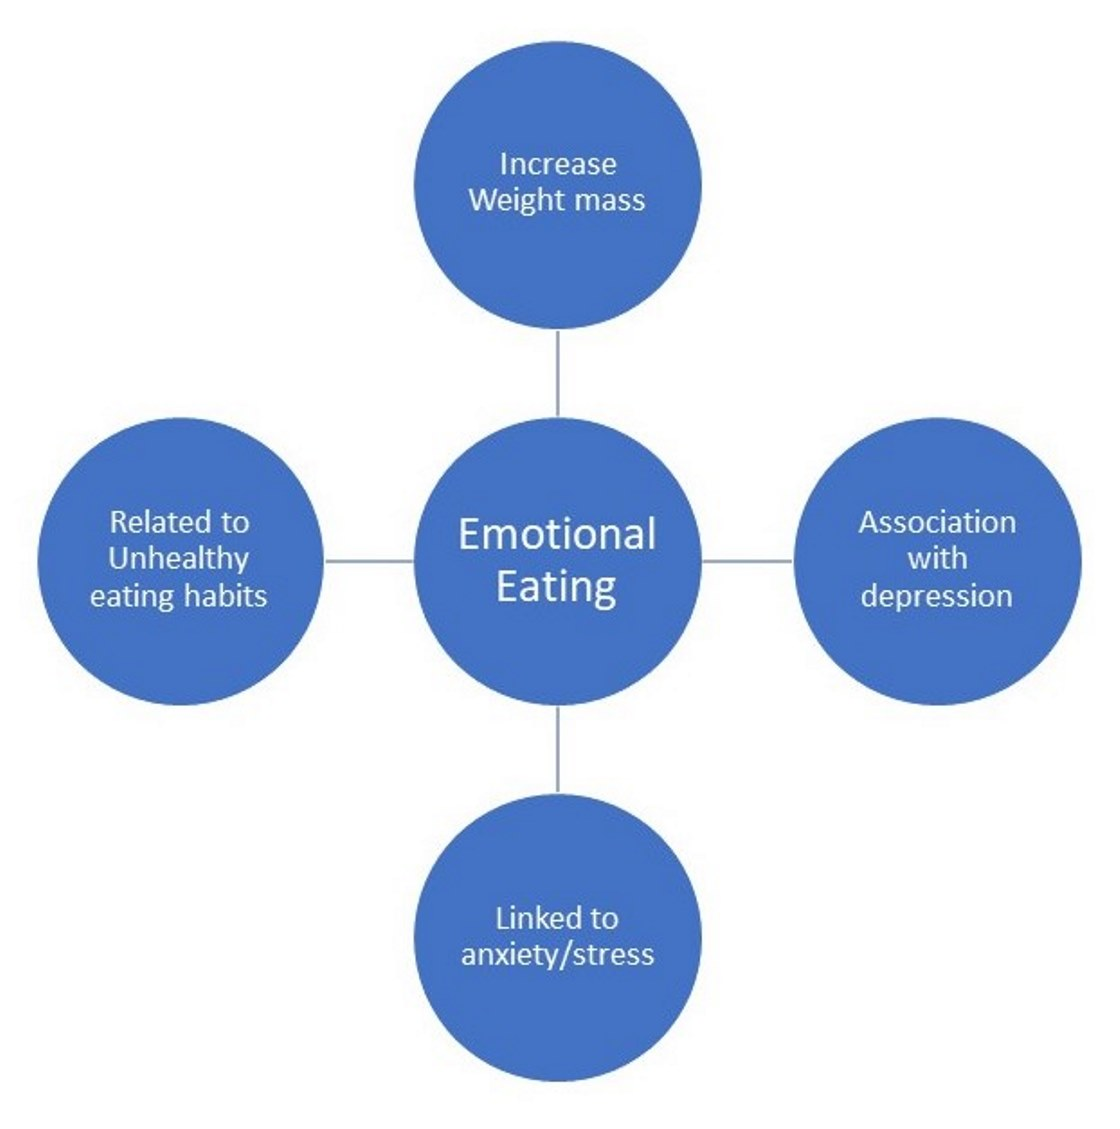 Obesity and emotional eating